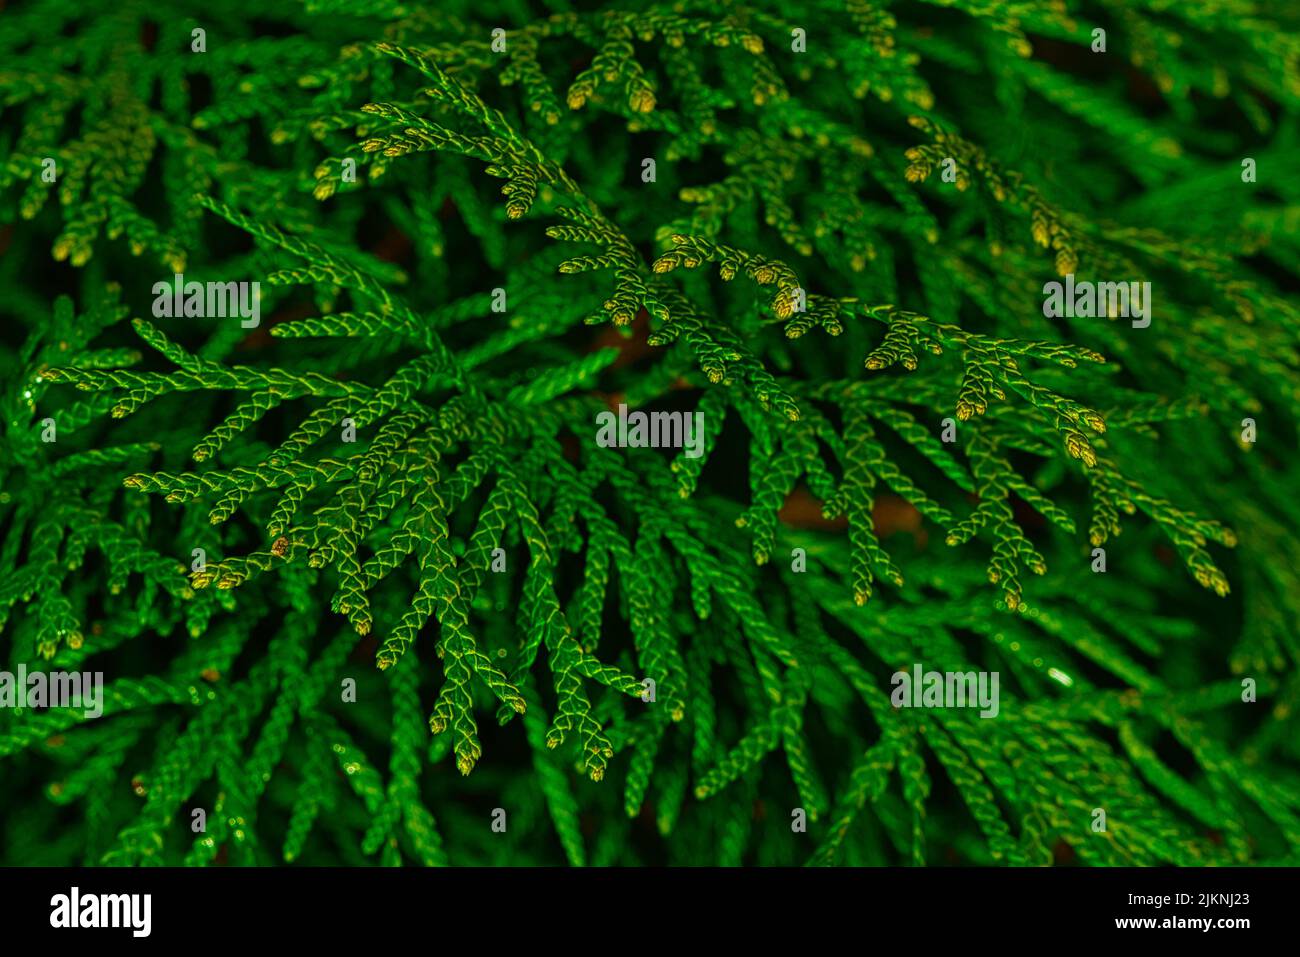 A closeup of green Thujopsis dolabrata tree branches - perfect for backgrounds Stock Photo